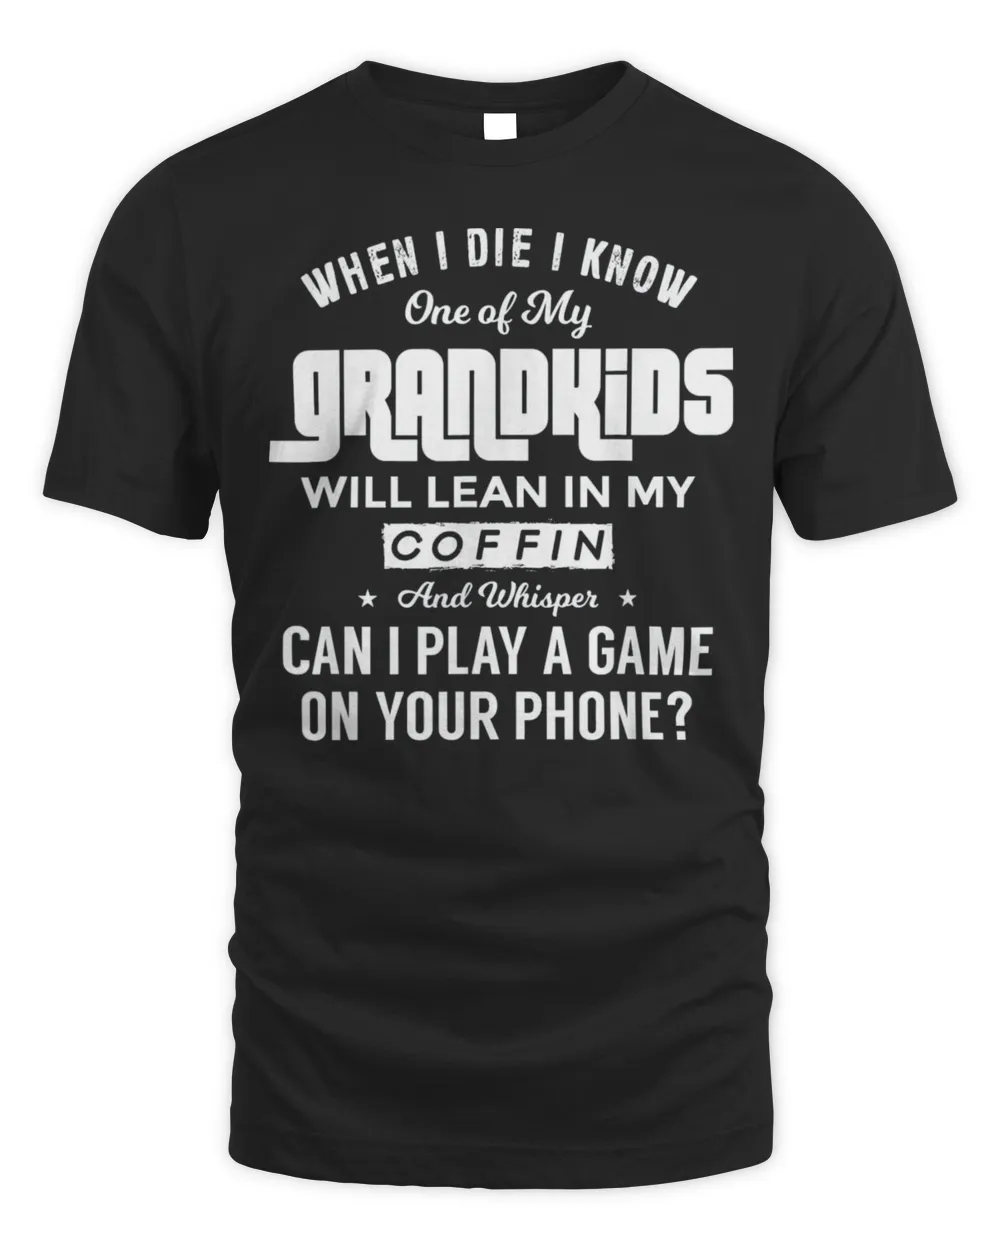 When I Die I Know One Of My Grandkids Will Lean In My Coffin T-Shirt